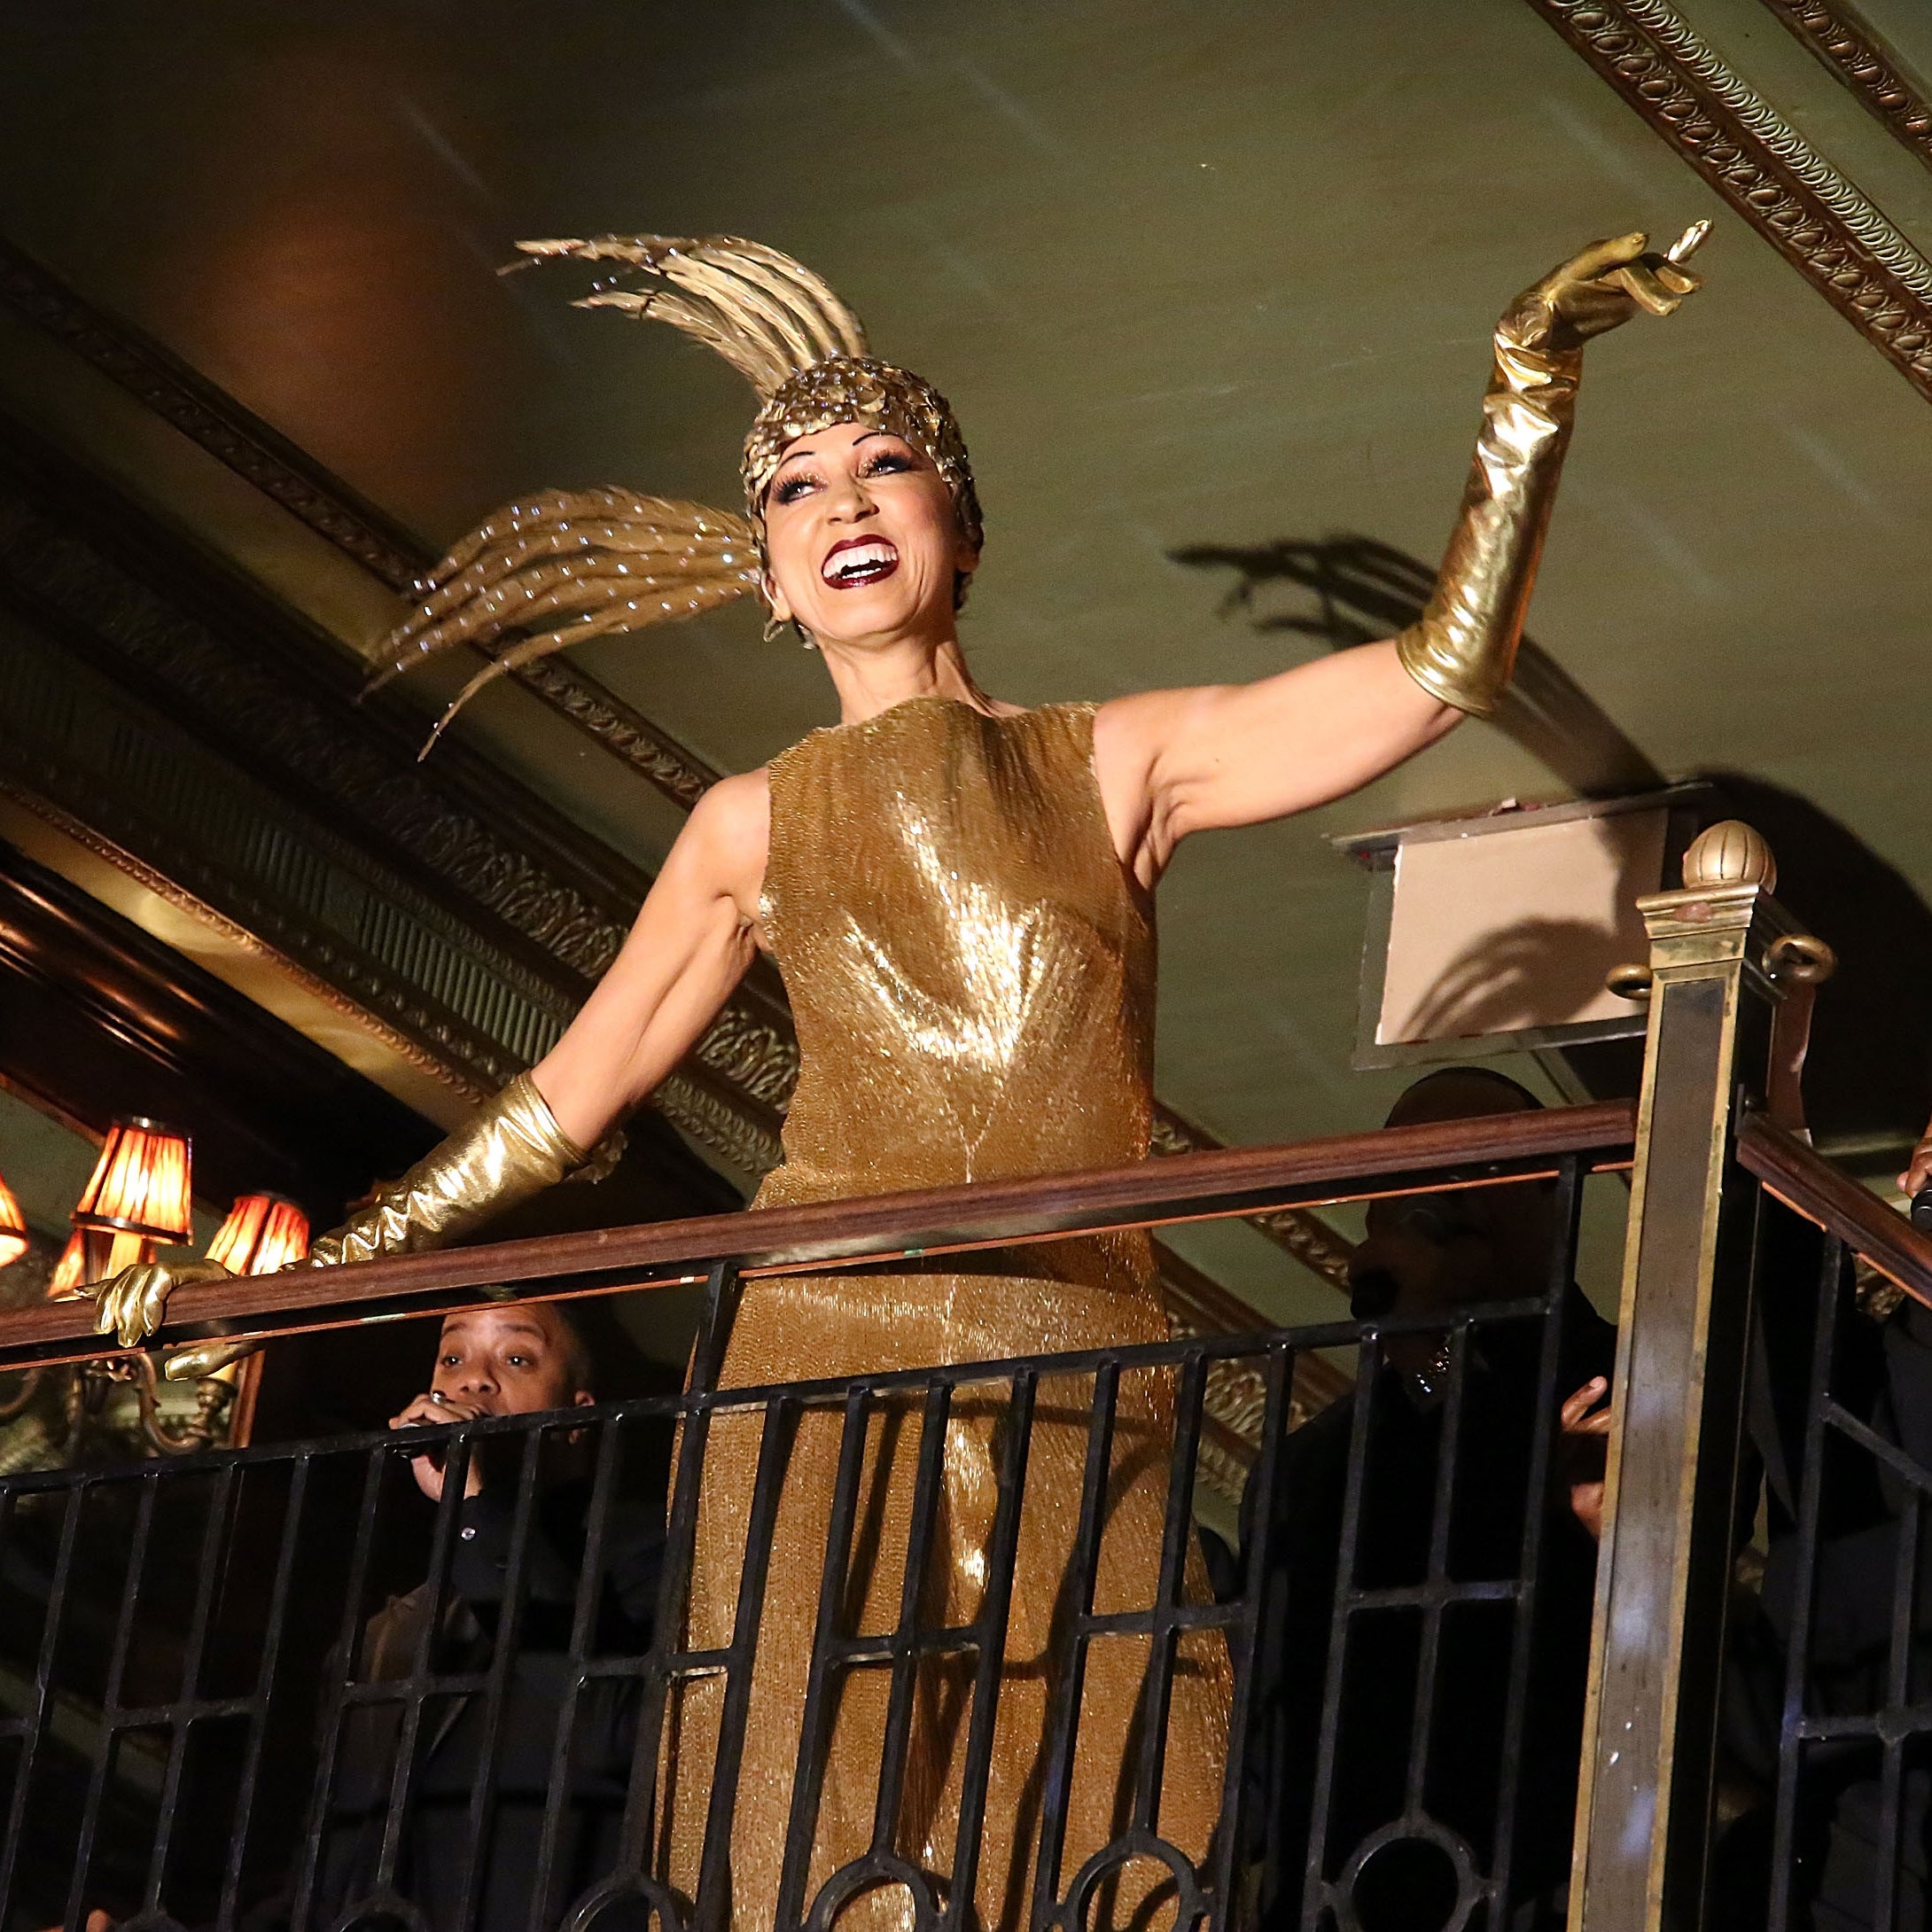 Pat Cleveland's 1920's Themed Book Release Party Was Everything
